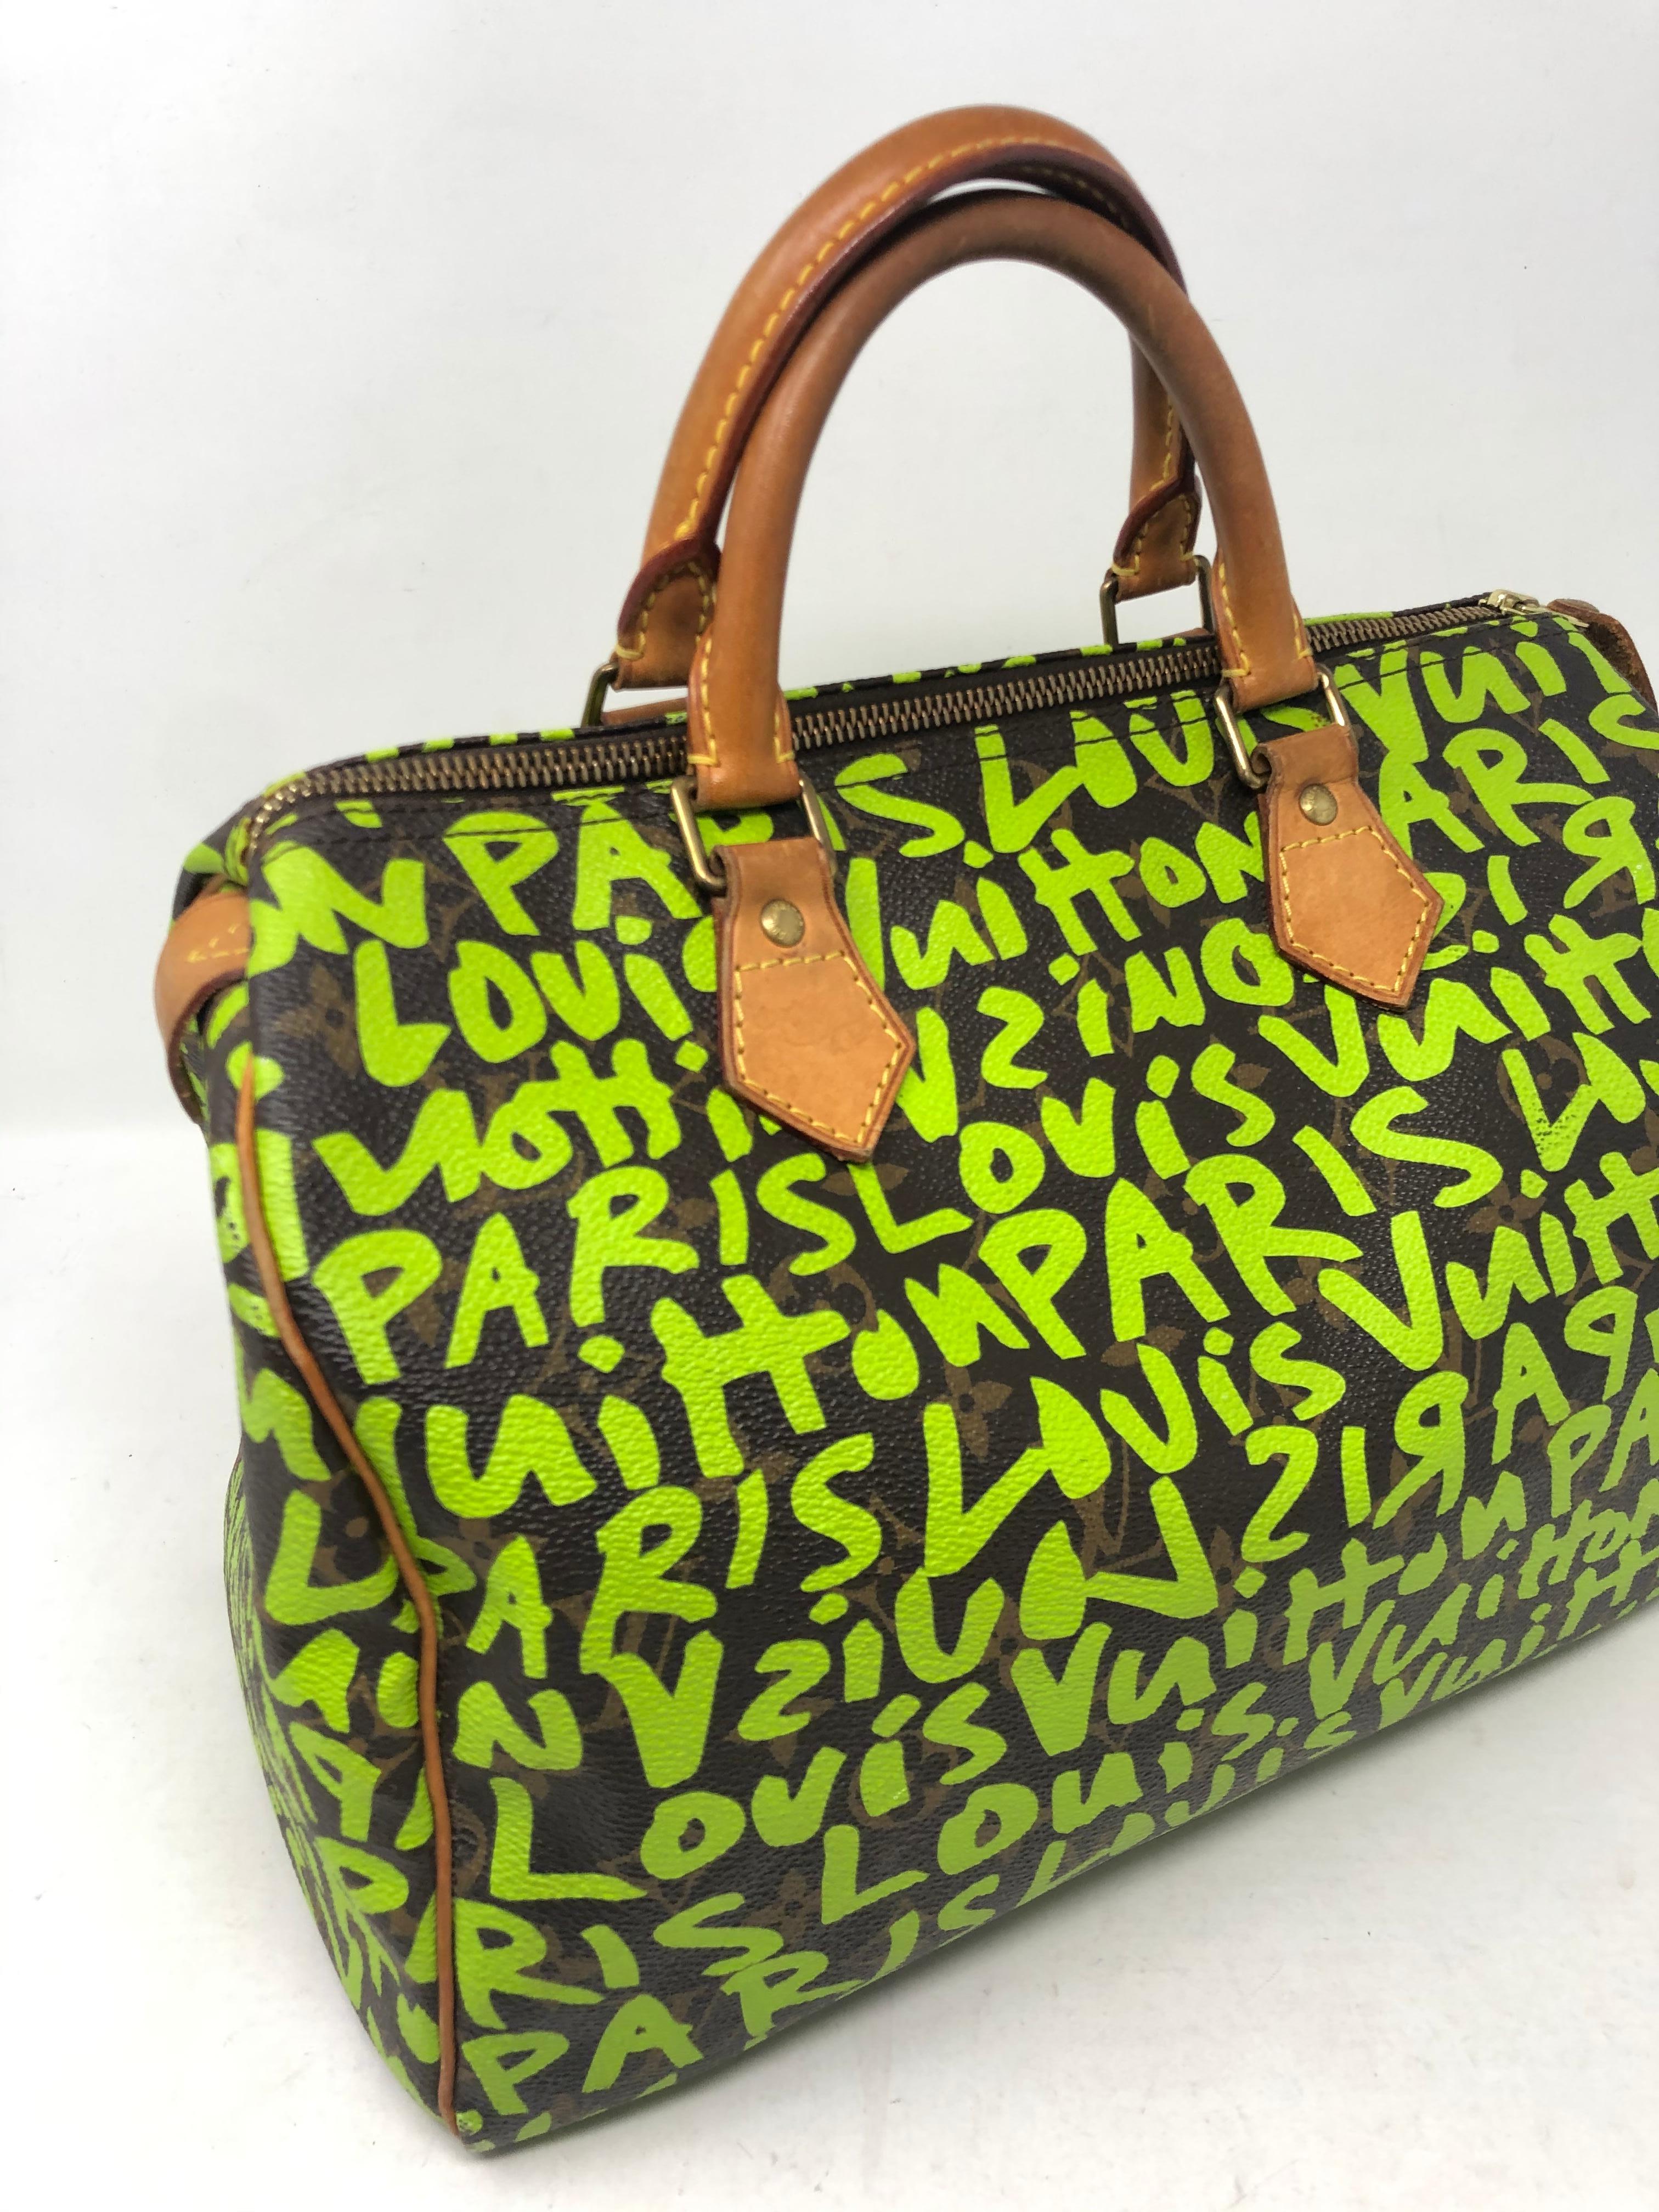 Louis Vuitton Speedy 30 Neon Graffitti Bag by Stephen Sprouse. Iconic and rare piece by the artist. Own a collector's piece. Good condition. Normal wear from 2008. Guaranteed authentic. 